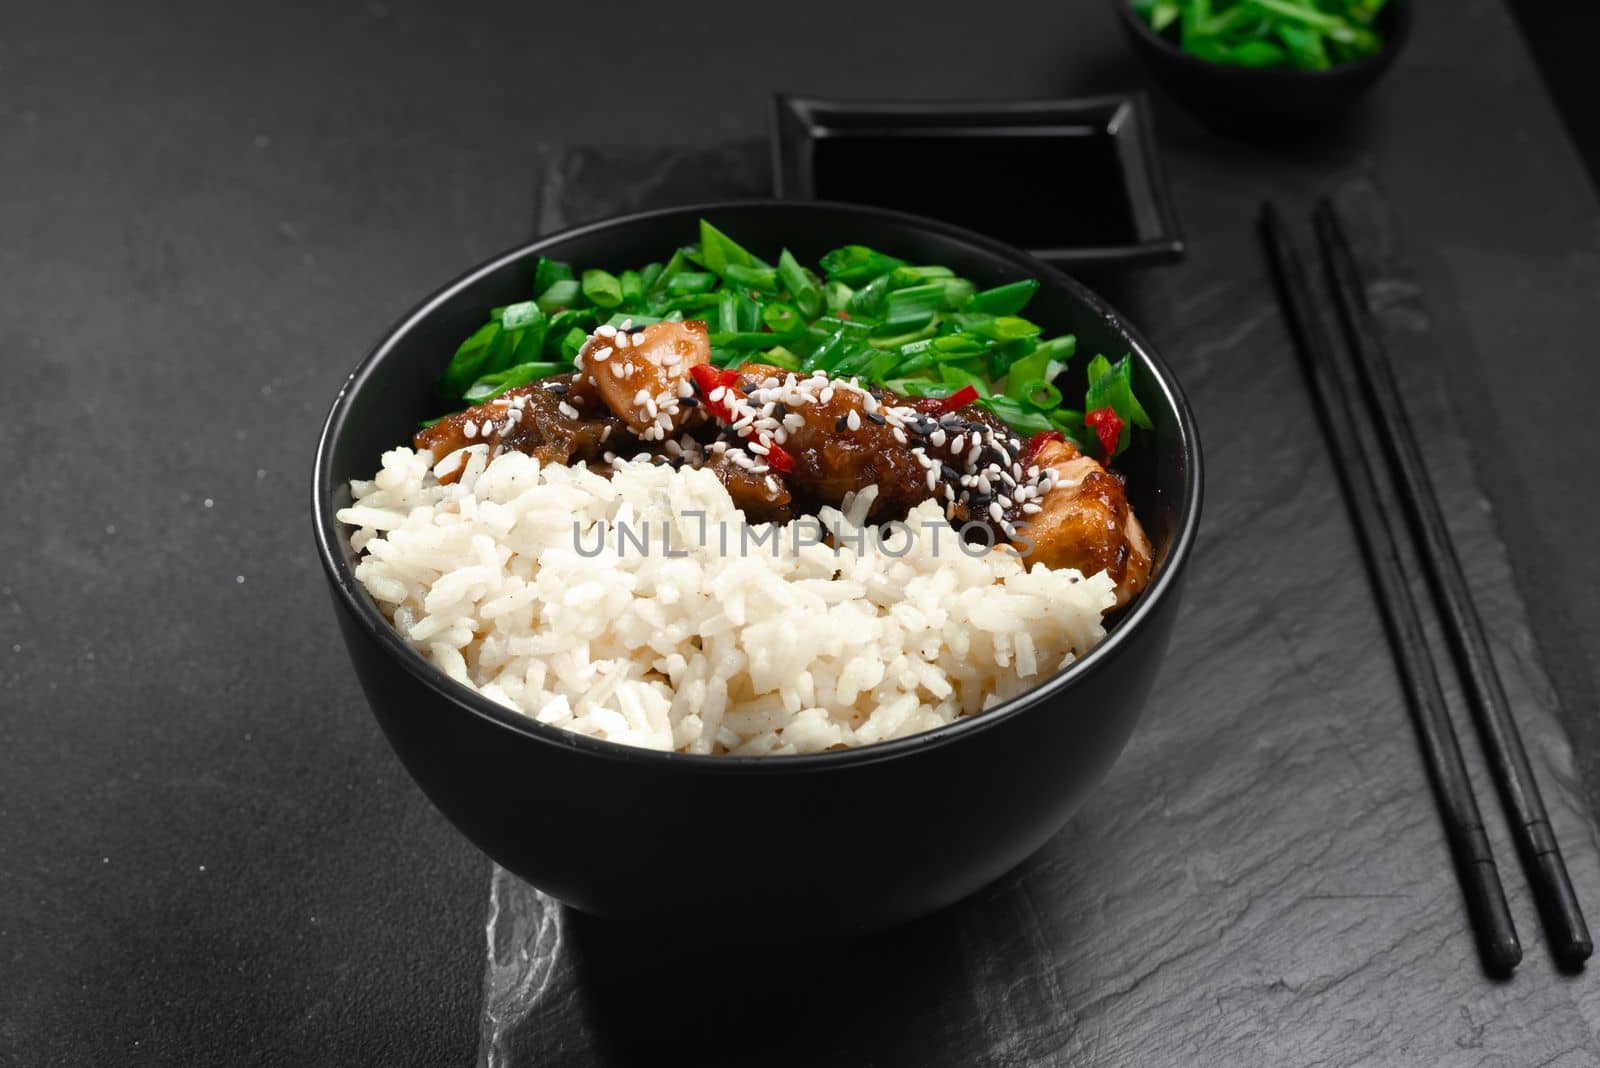 Asian food. Asian-style kung pao chicken with rice and green onions. Kung Pao chicken. Gong Bao Ji Ding on a dark concrete background. Sichuan kung pao is a Chinese dish with chicken meat. Top view.